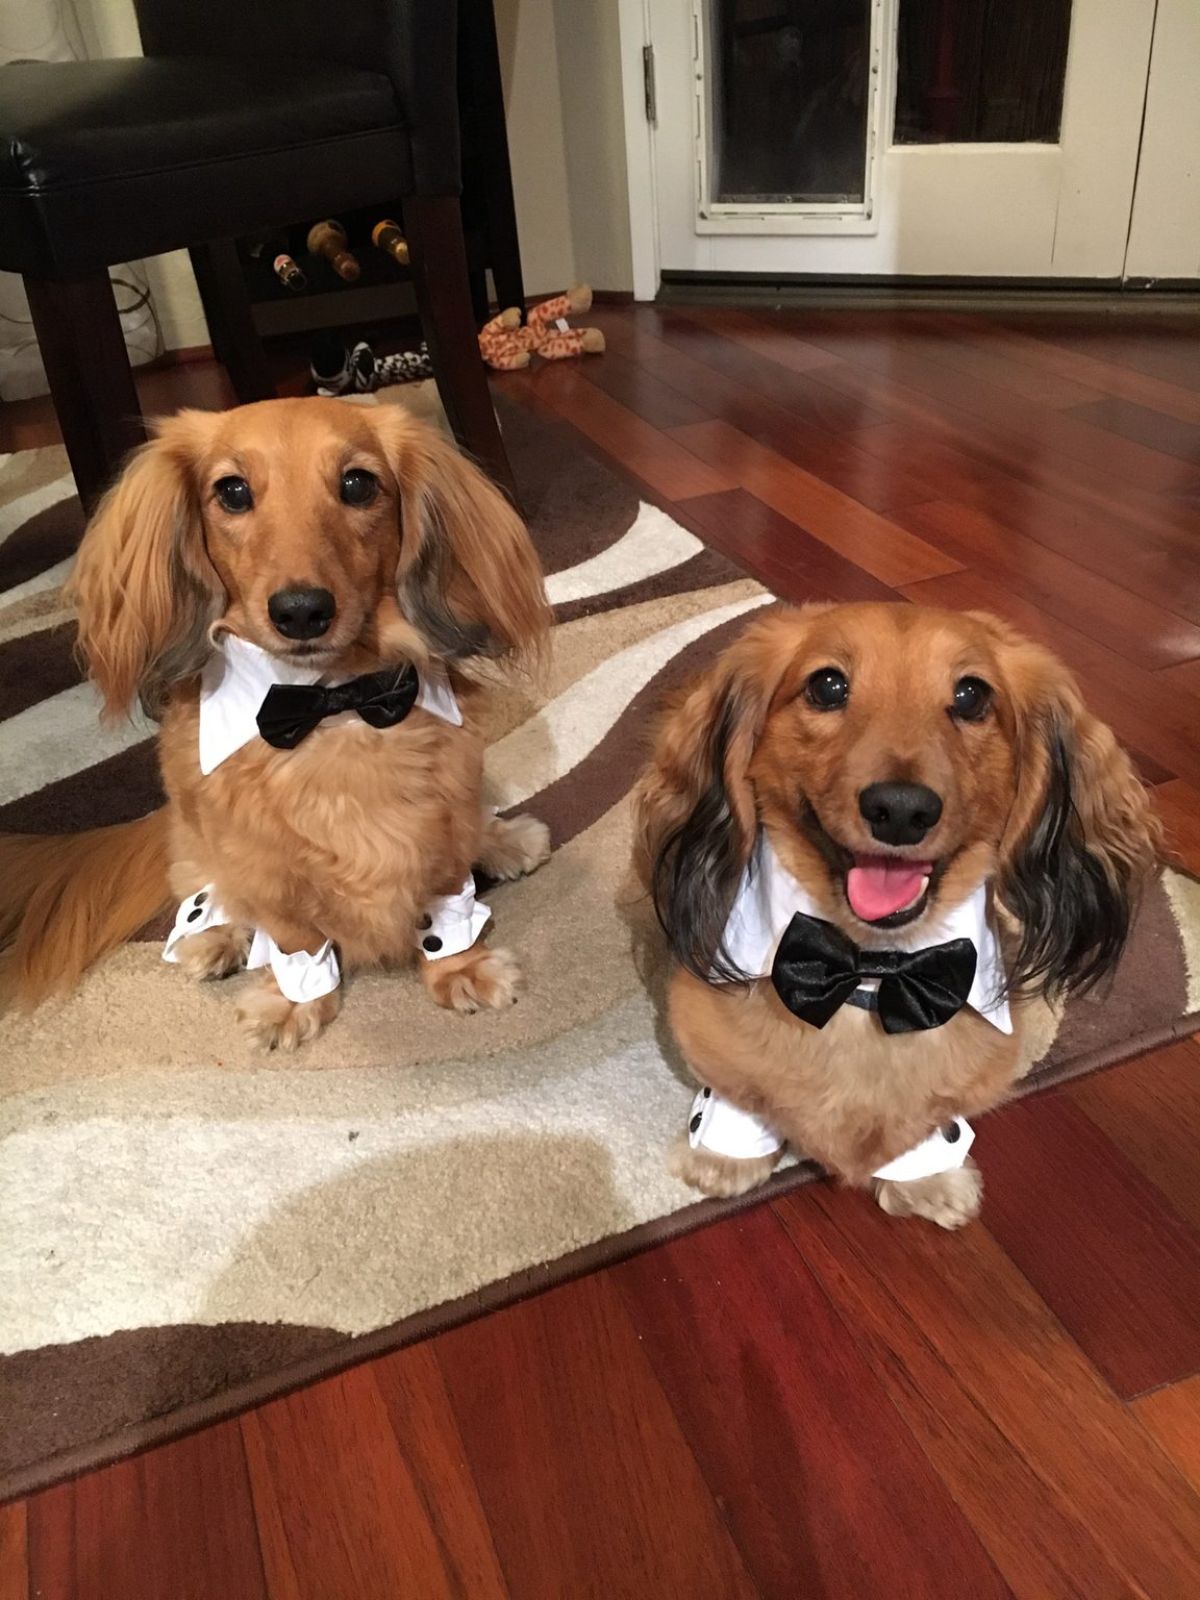 2 fluffy brown dachshuns wearing collars with bow ties and white shirt sleeves with black buttons